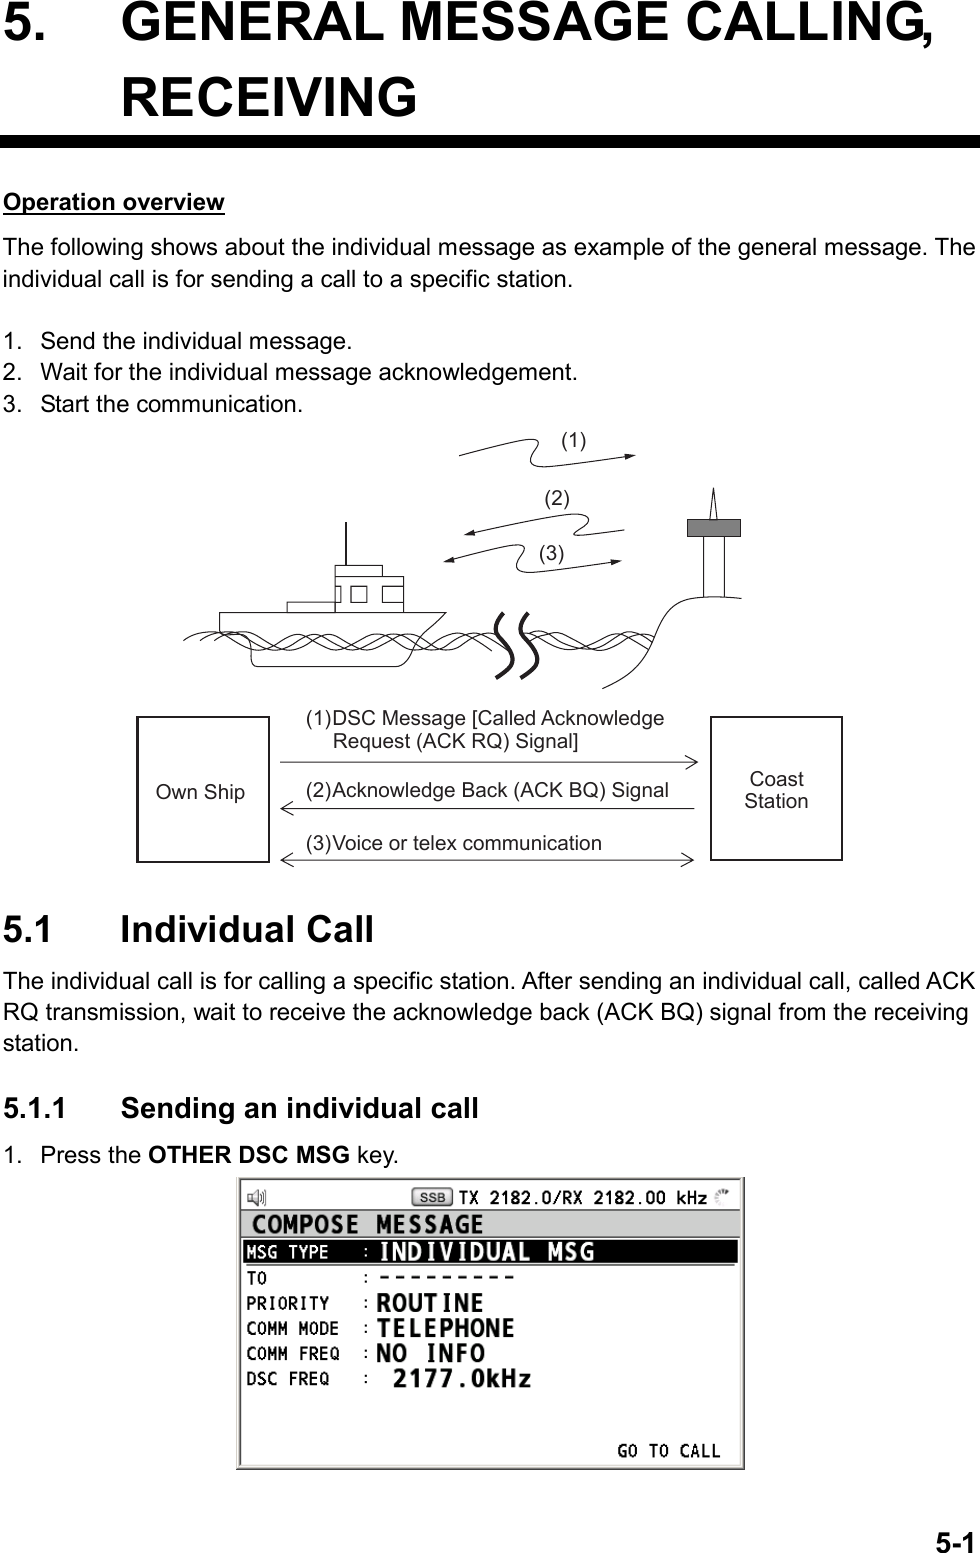   5-15.  GENERAL MESSAGE CALLING, RECEIVING Operation overview The following shows about the individual message as example of the general message. The individual call is for sending a call to a specific station.  1.  Send the individual message. 2.  Wait for the individual message acknowledgement. 3.  Start the communication. (1)(2)(3)Own Ship CoastStation(1)DSC Message [Called Acknowledge Request (ACK RQ) Signal](2)Acknowledge Back (ACK BQ) Signal(3)Voice or telex communication  5.1 Individual Call The individual call is for calling a specific station. After sending an individual call, called ACK RQ transmission, wait to receive the acknowledge back (ACK BQ) signal from the receiving station.   5.1.1  Sending an individual call 1. Press the OTHER DSC MSG key. 